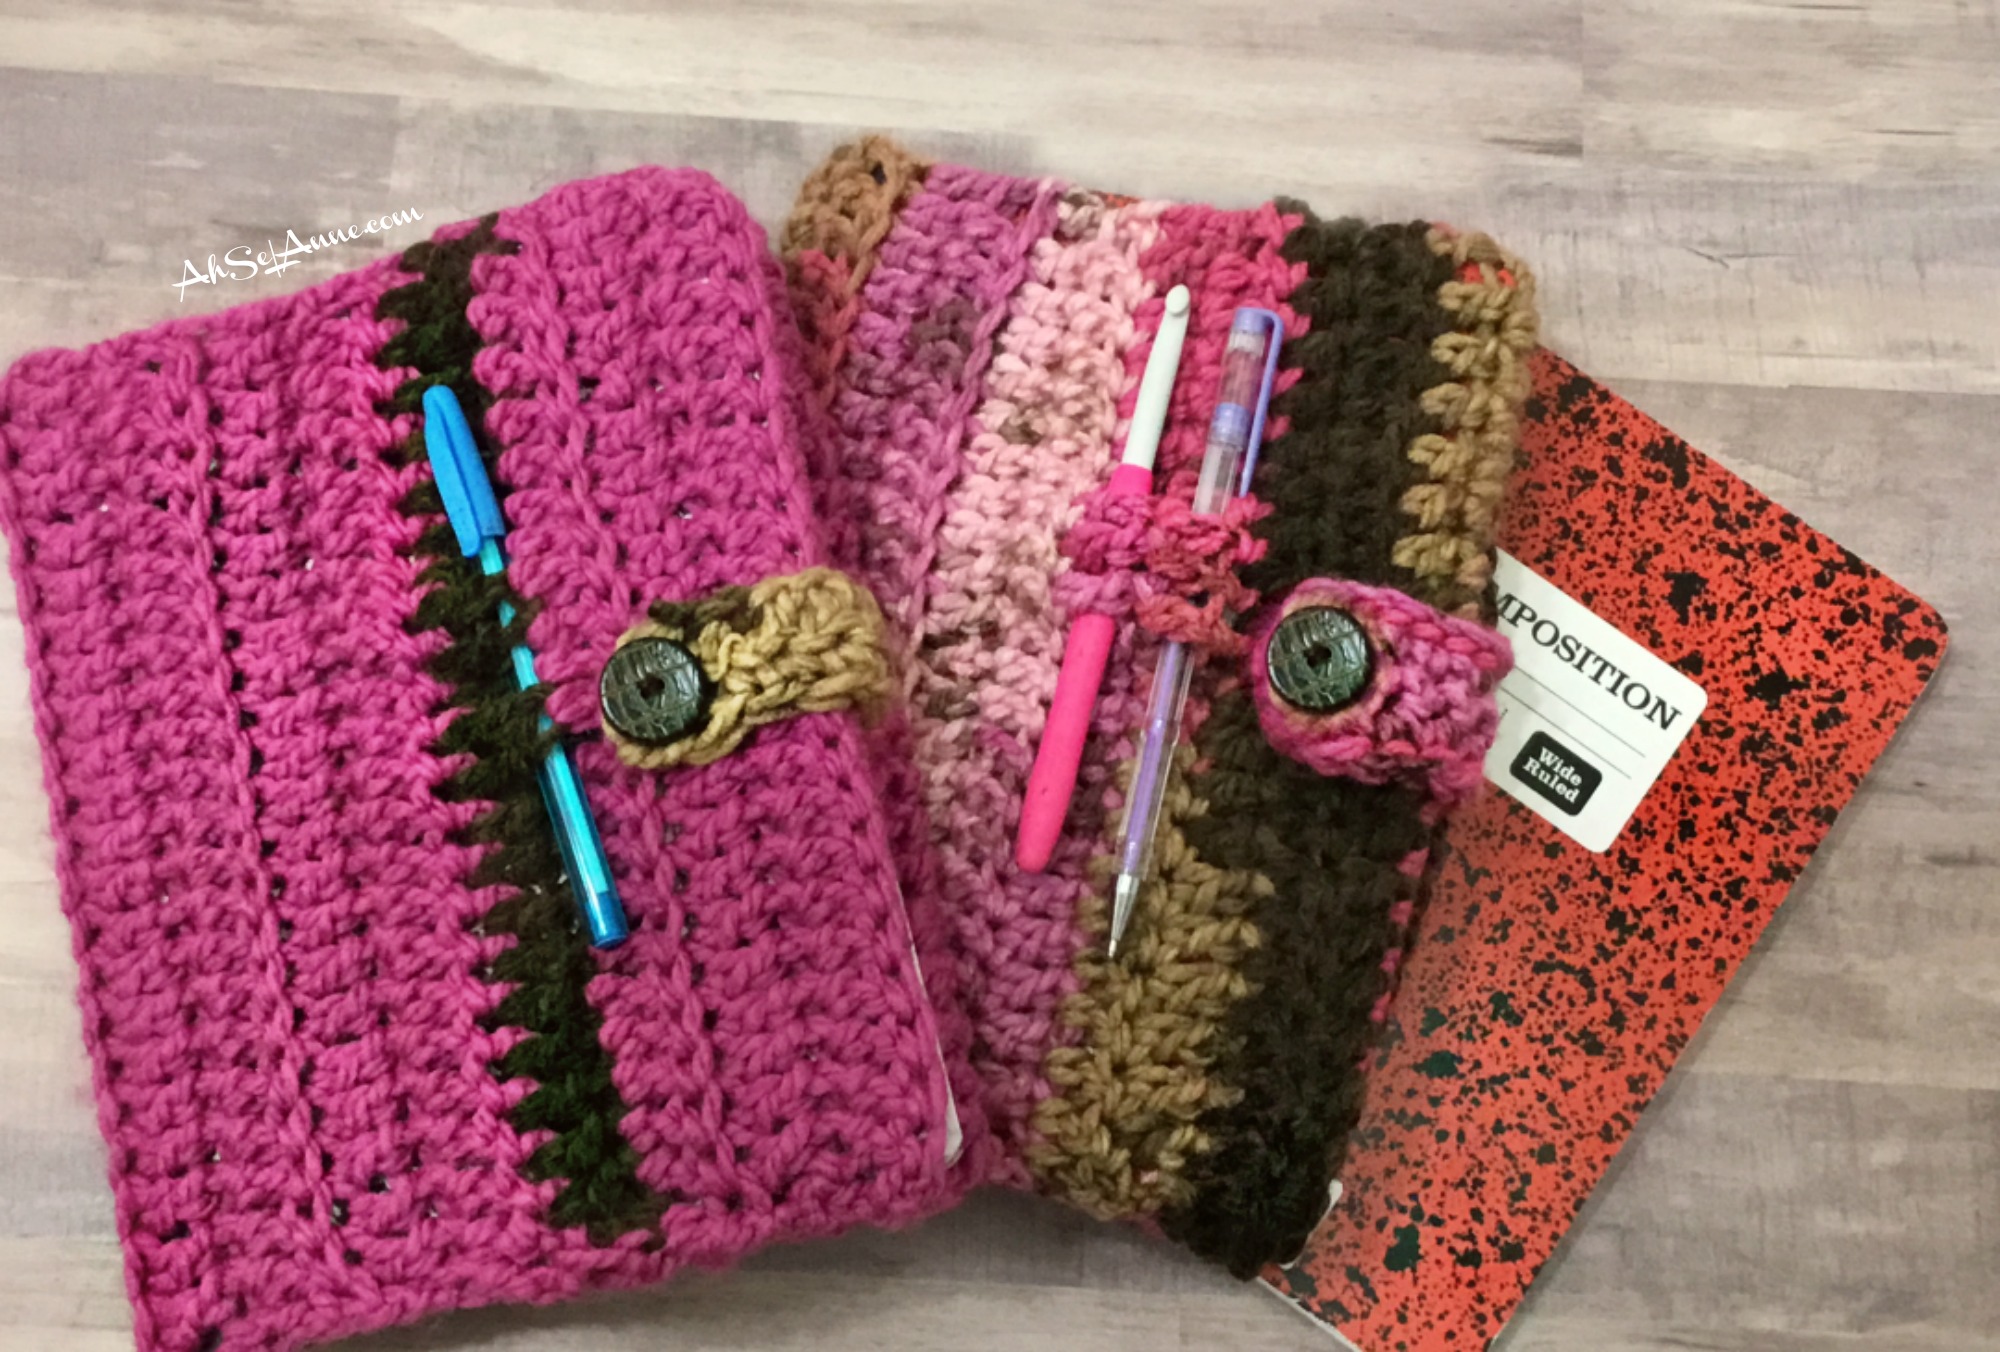 CROCHET BOOK COVER - COMPOSITION BOOK COVER - Ahsel Anne